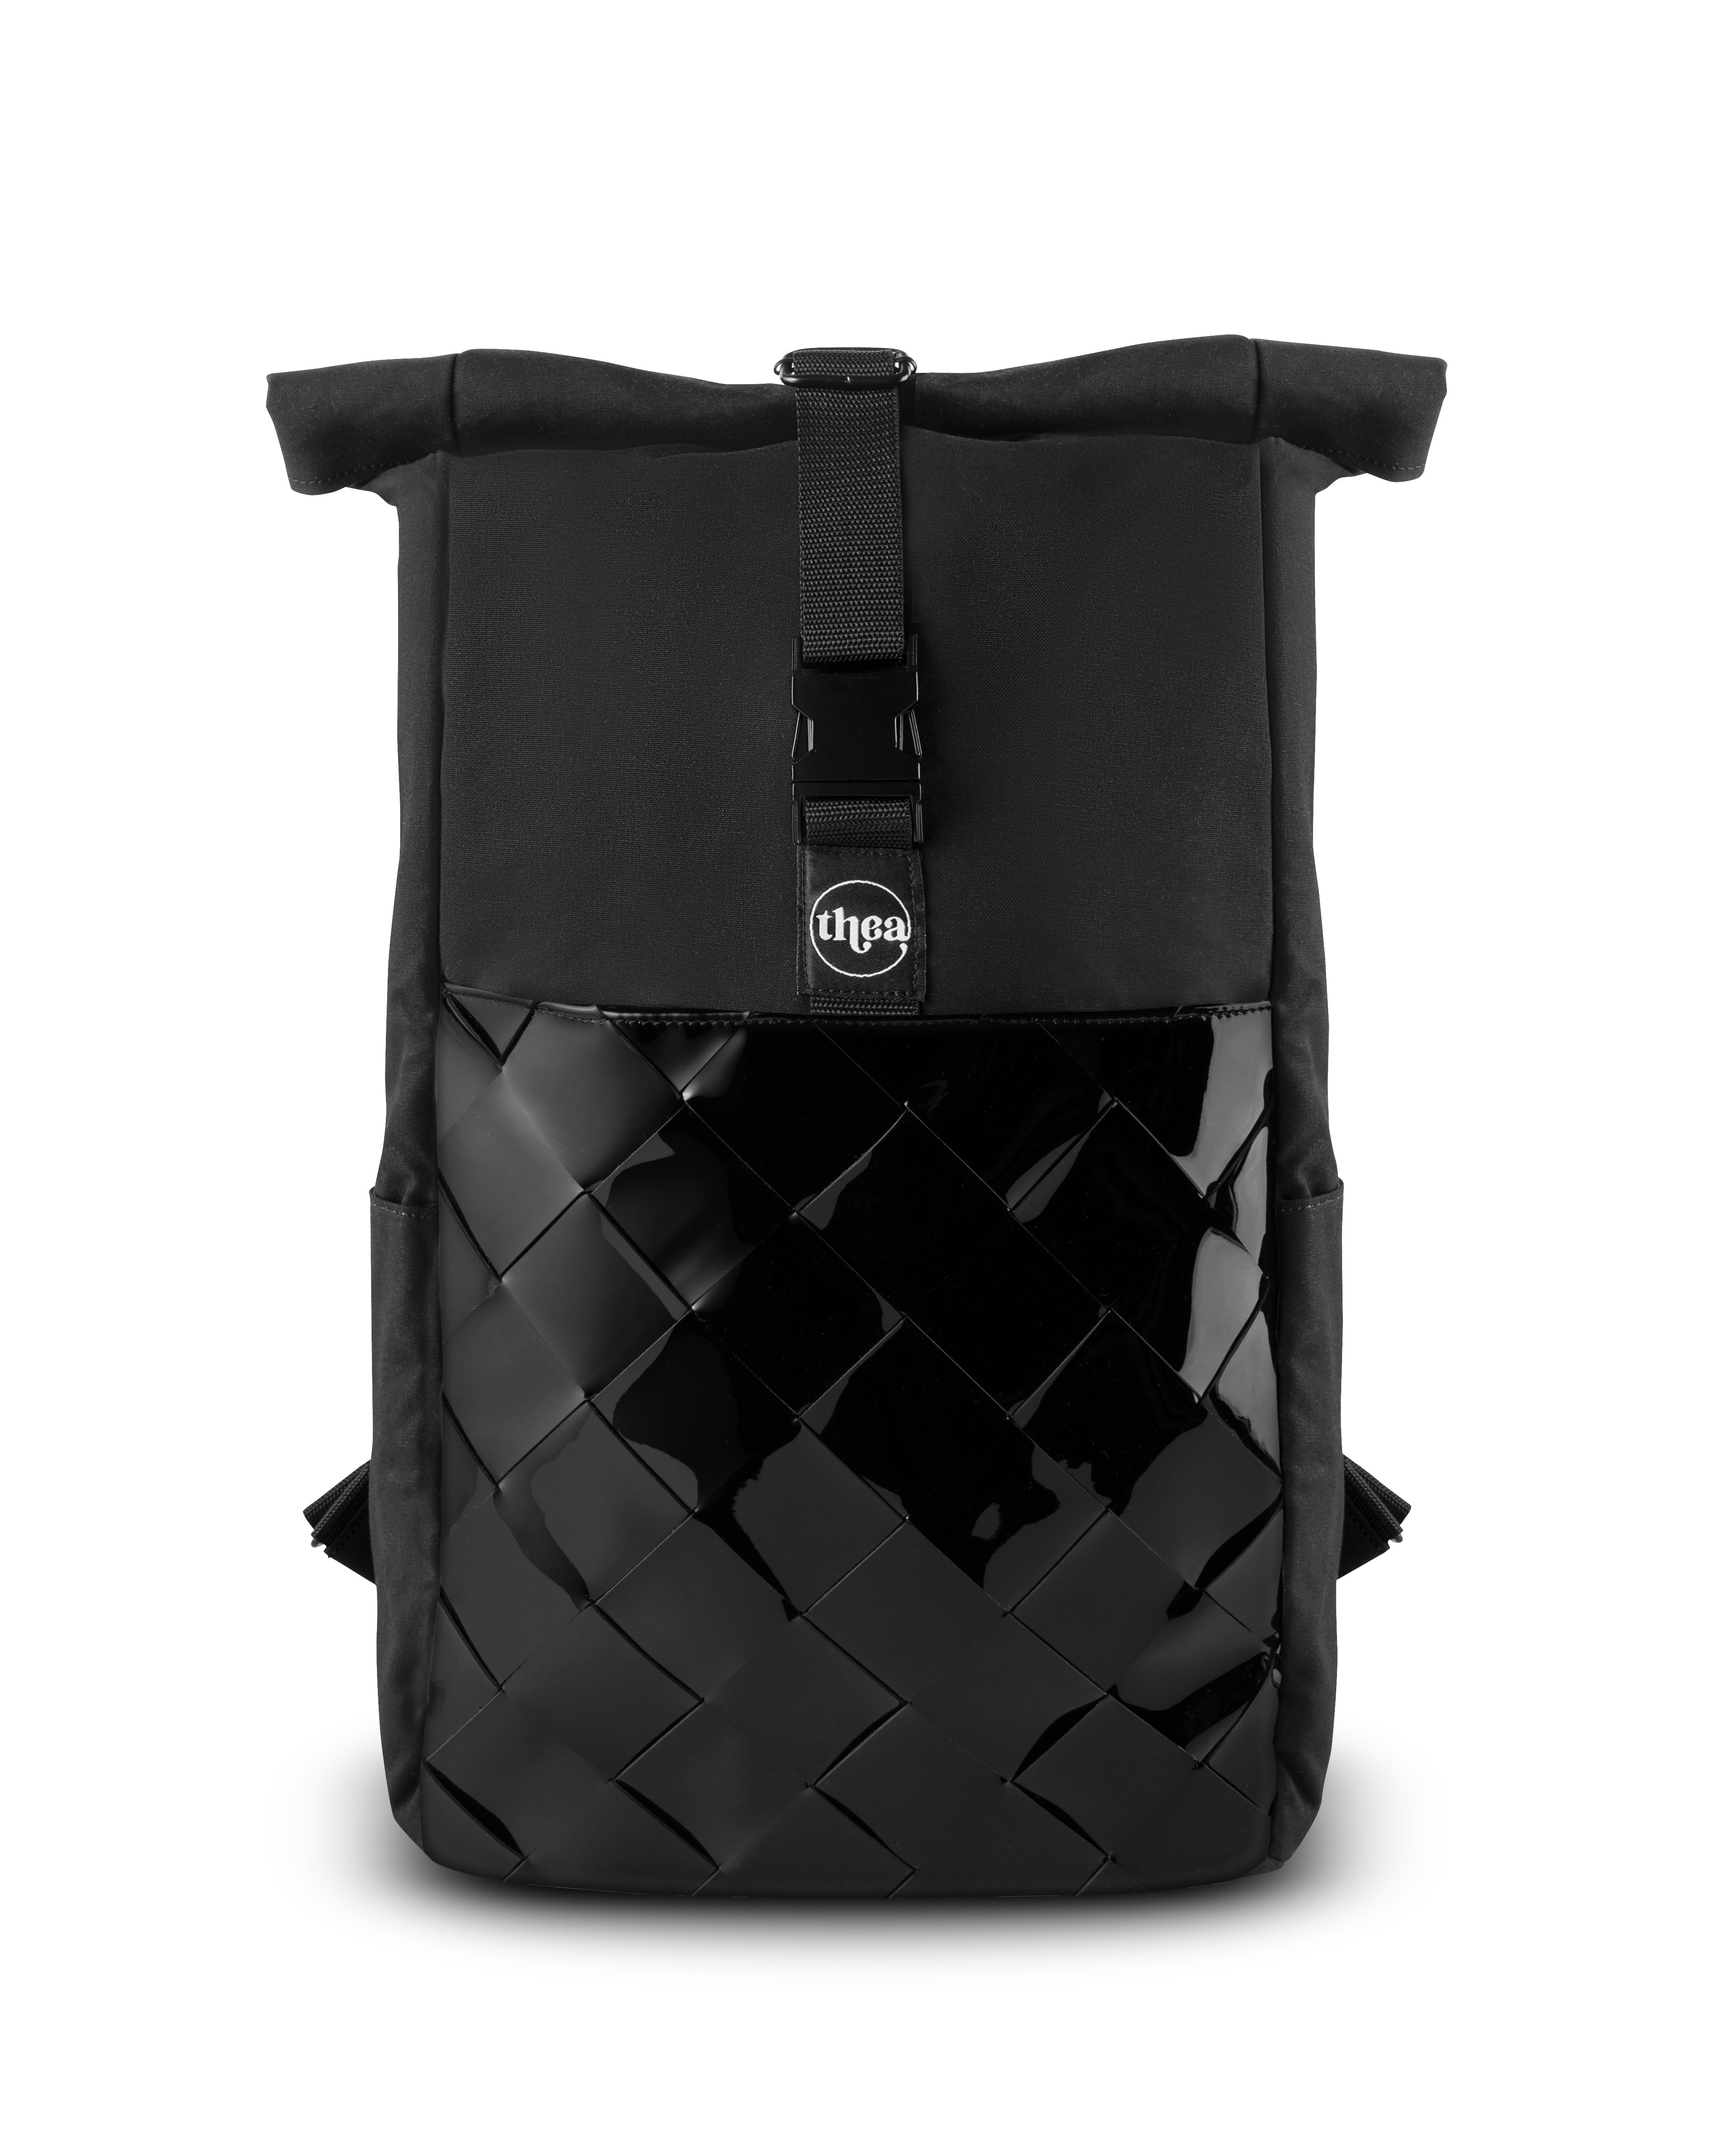 SUMMIT Roll Top Backpack-Black Patent Leather - theabags